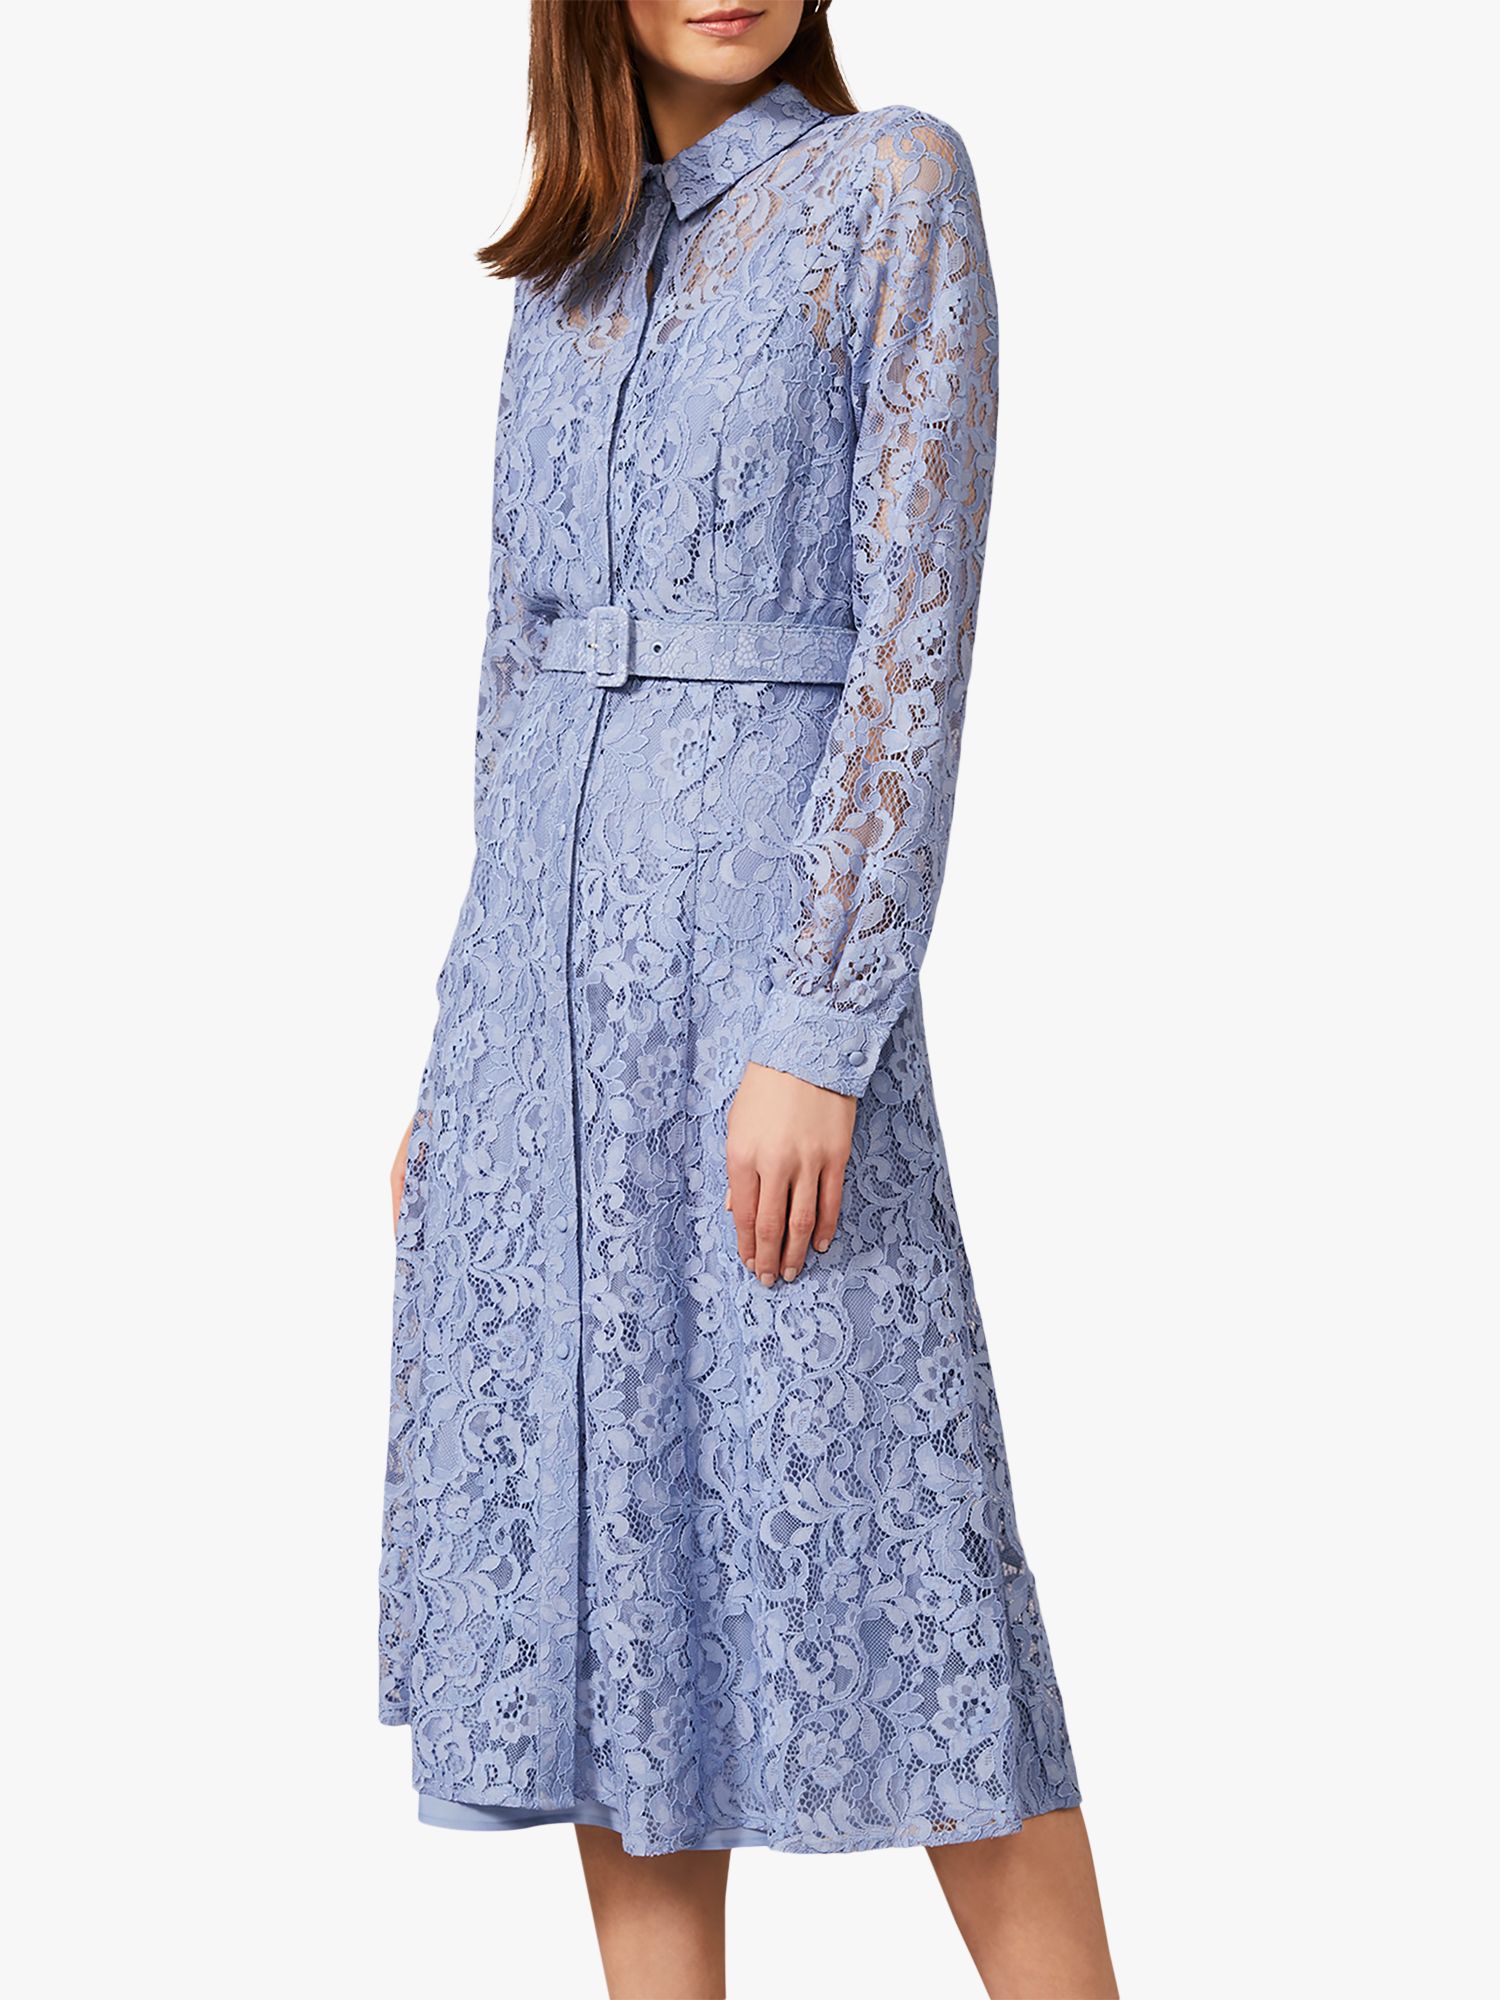 Phase Eight Autumn Lace Belted Midi Dress, Bluebell